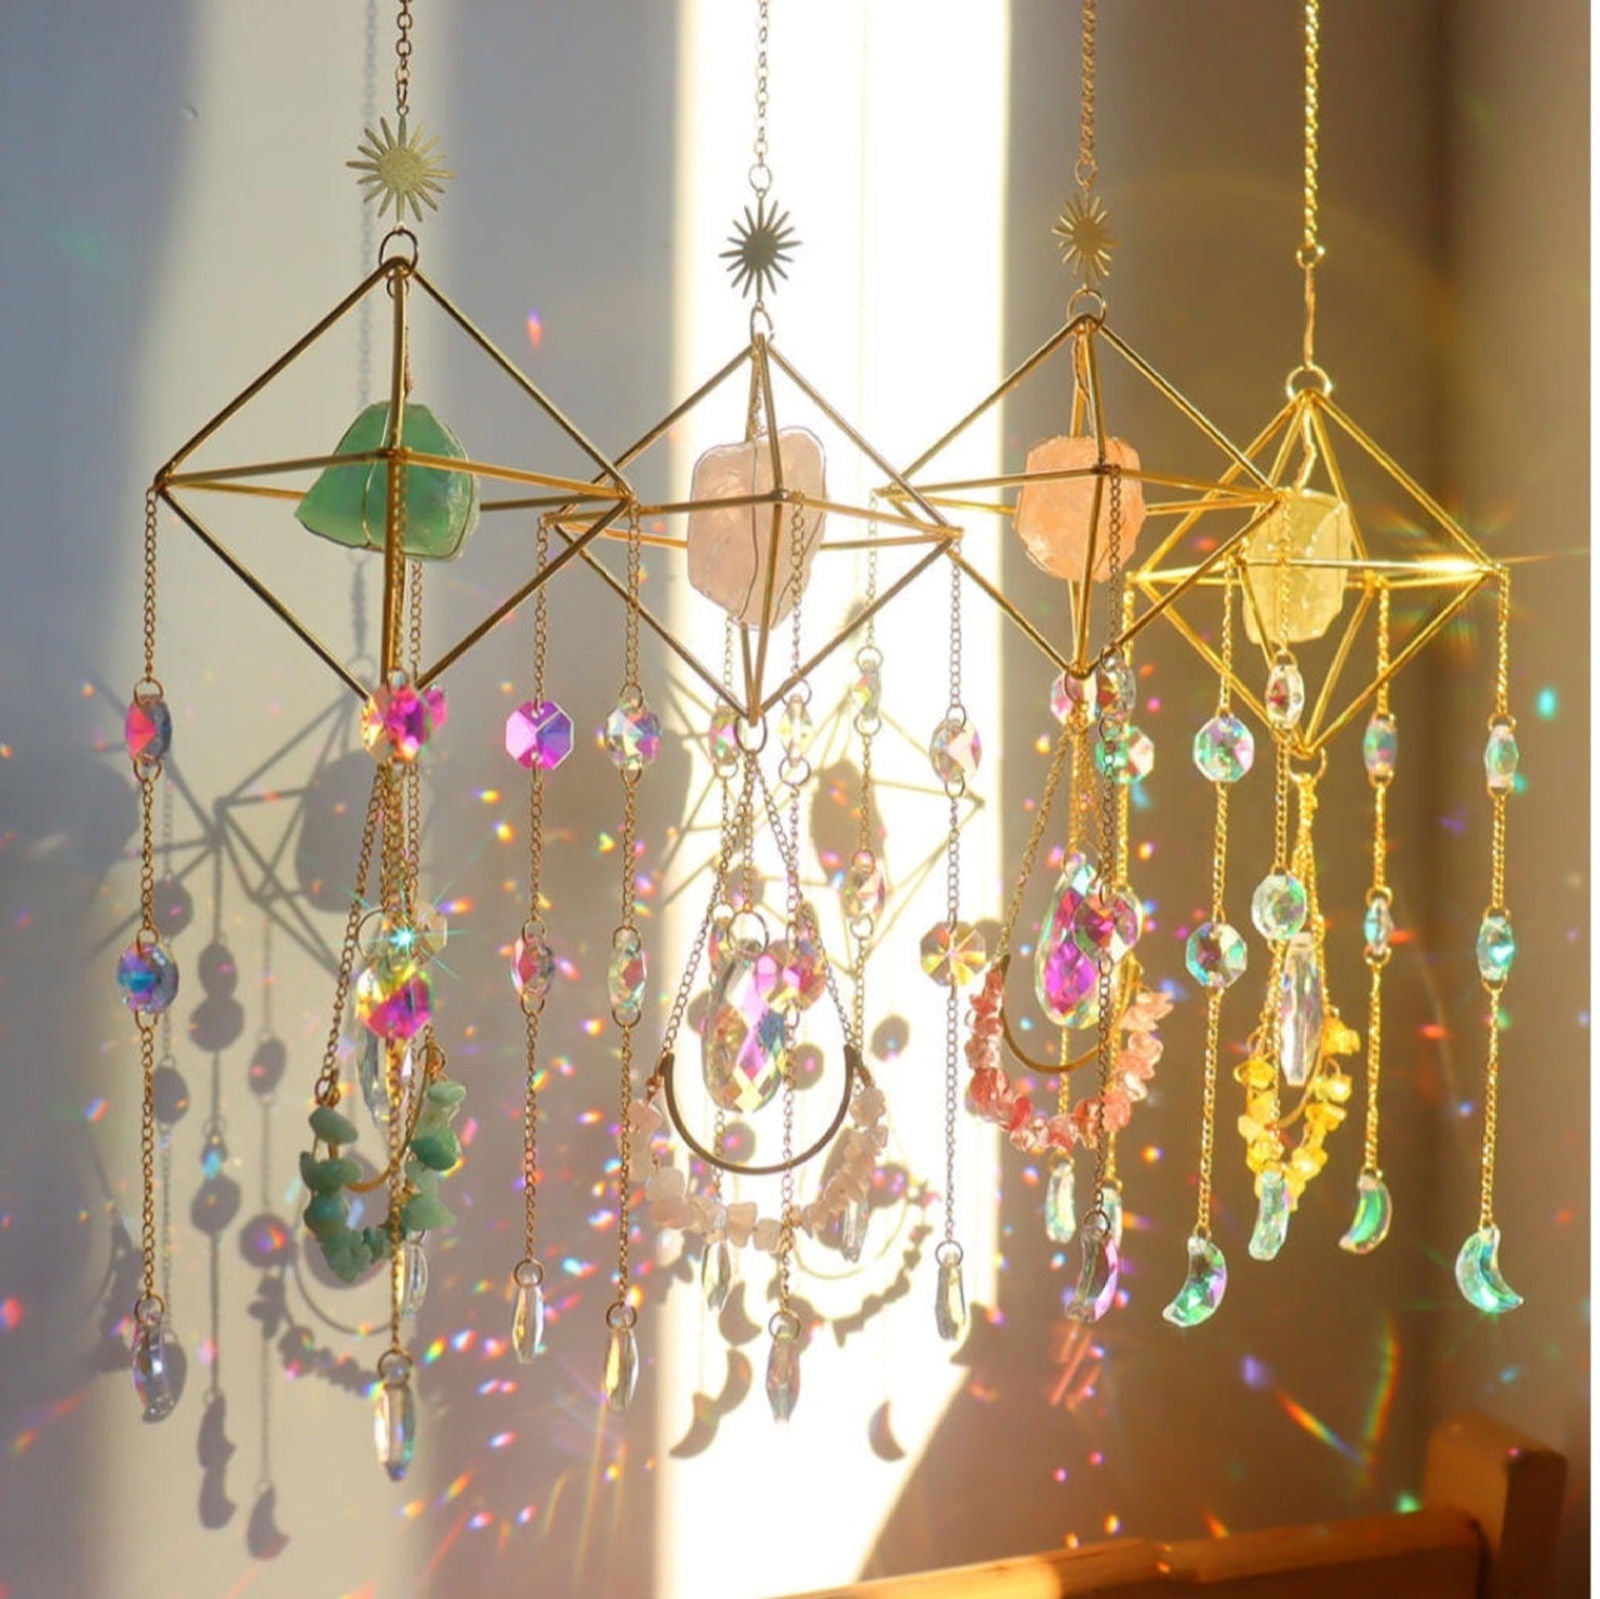 Opal | Crystal Wind Chime Moon and Sun Catcher - D SCENT 